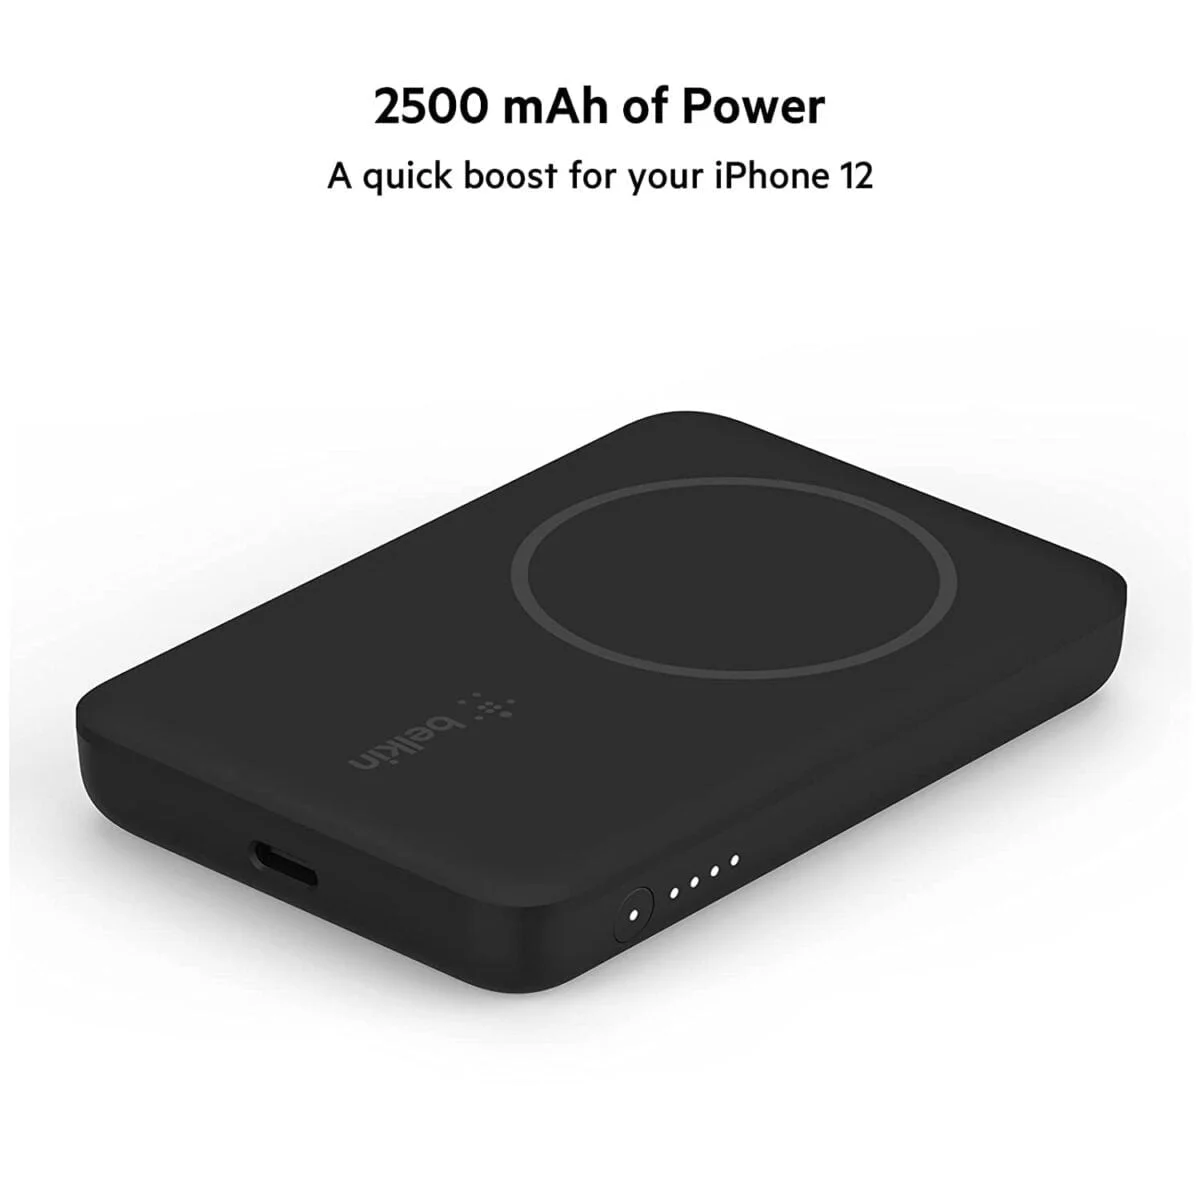 Belkin quick charge magnetic wireless power bank 6 belkin quick charge magnetic wireless power bank